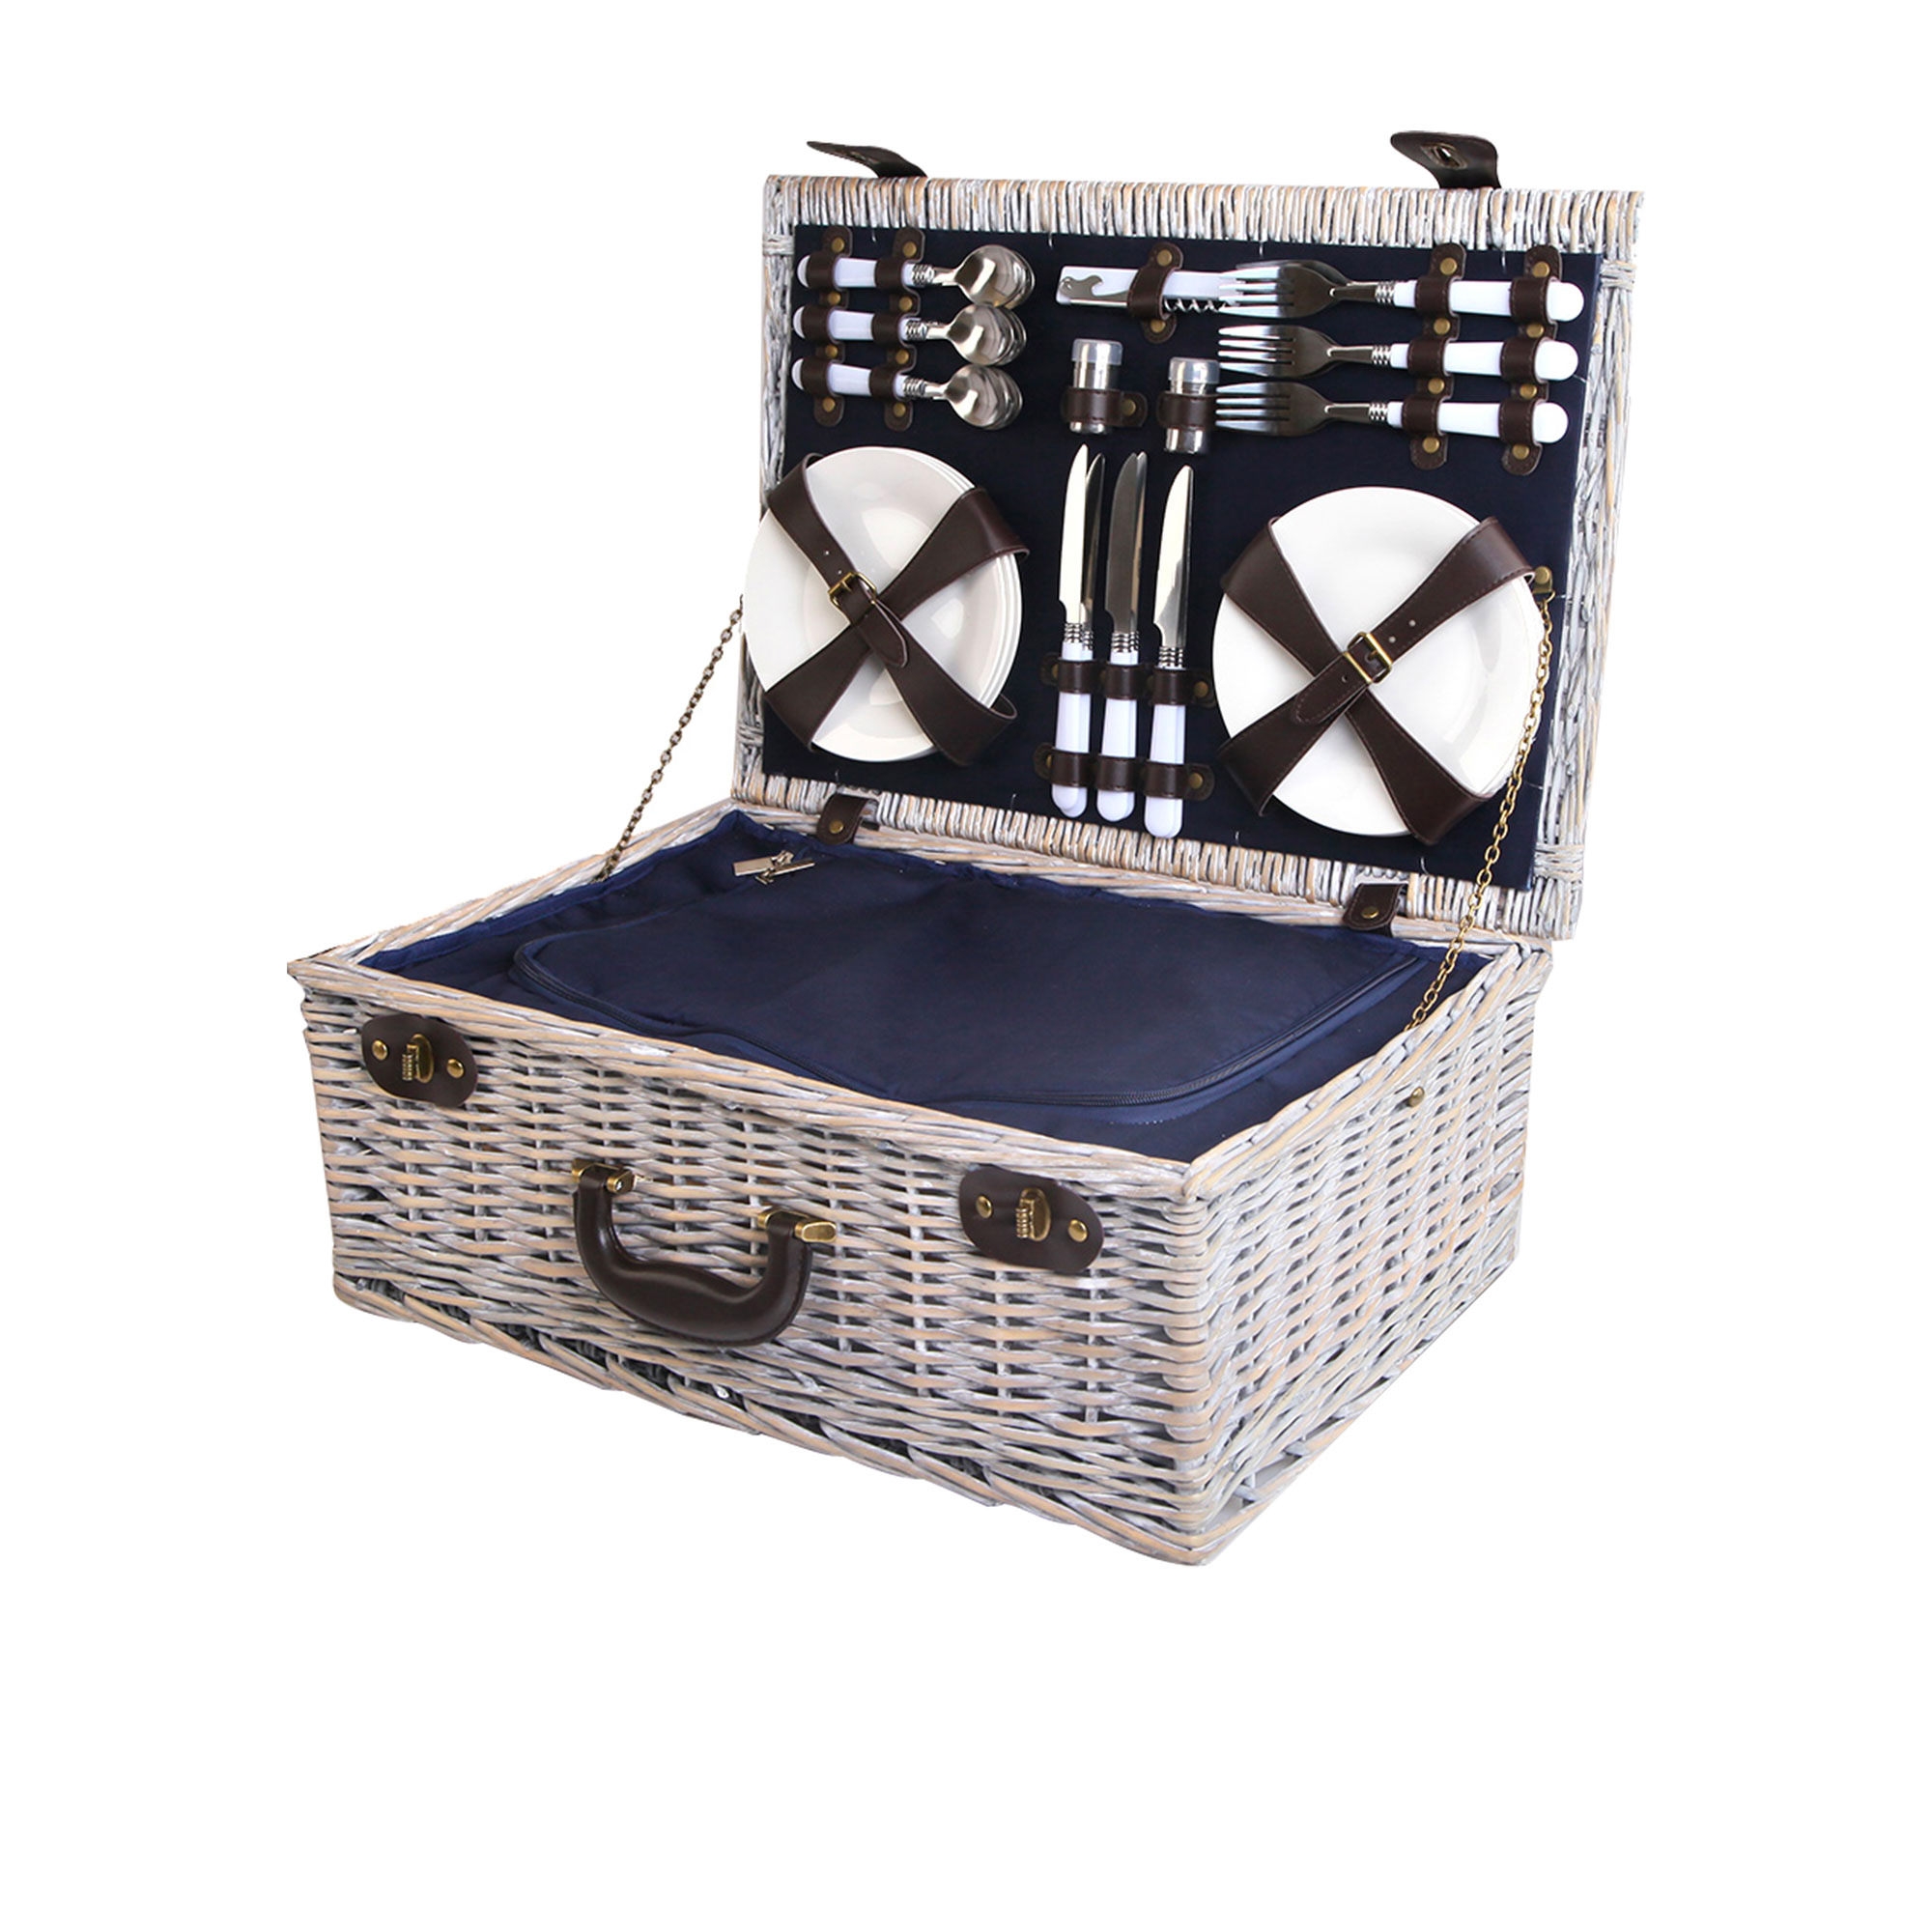 Alfresco 6 Person Insulated Picnic Basket with Navy Blue Blanket Image 2